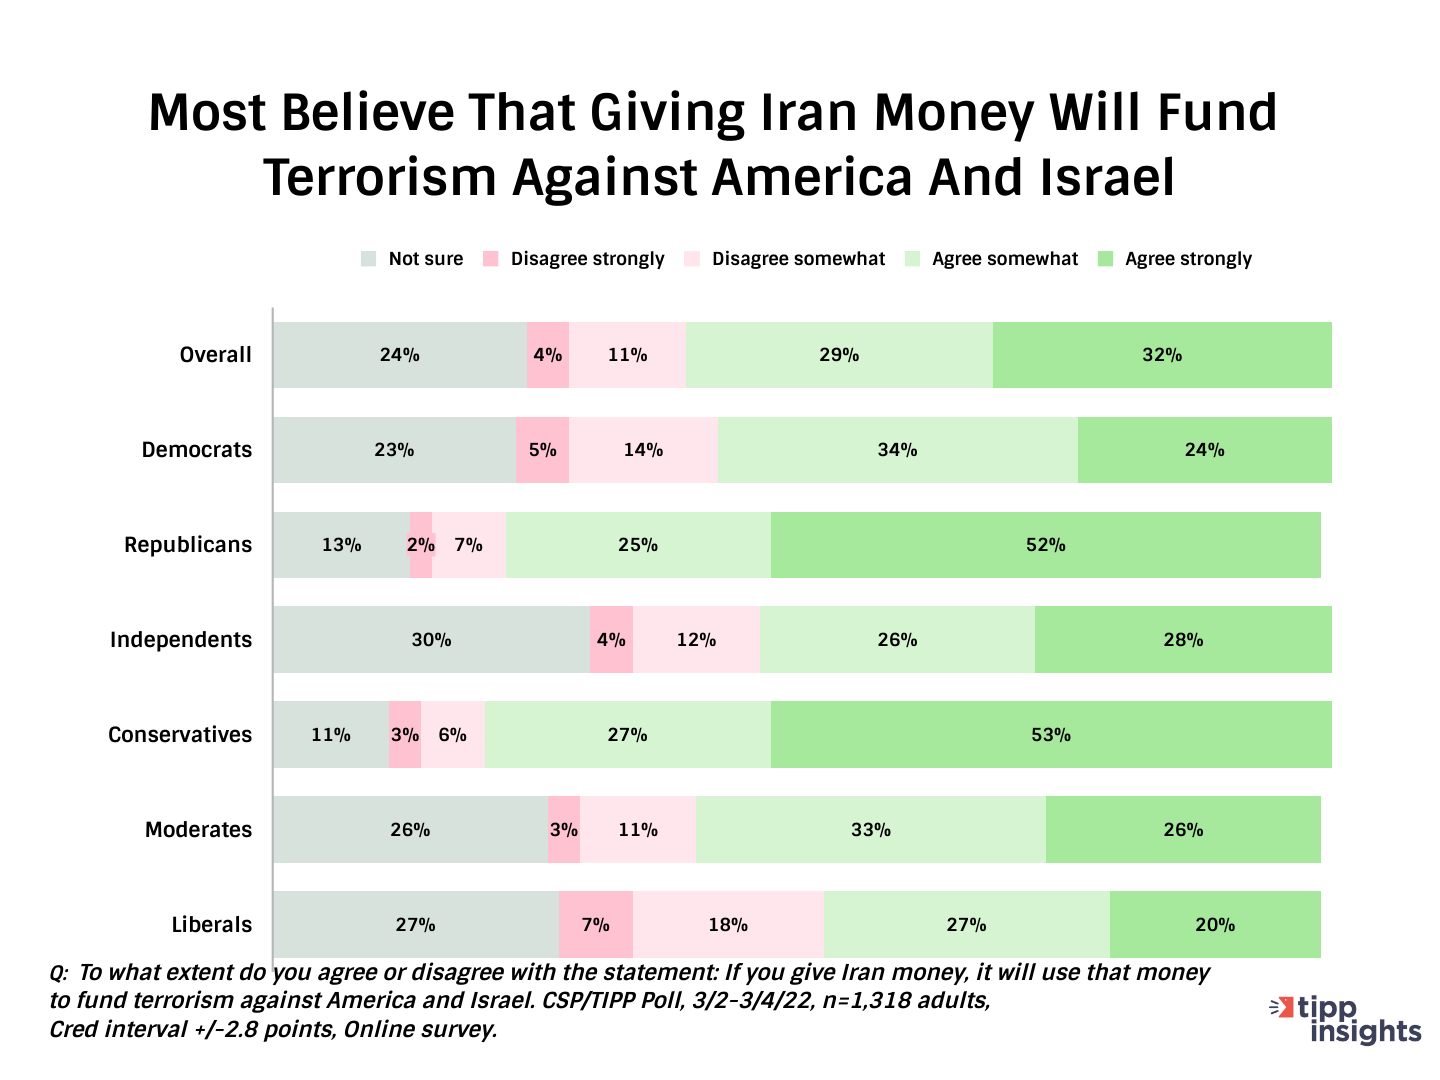 CSP/TIPP Poll Results: Most Americans believe that giving Iran money will fund terrorism against America and Israel.